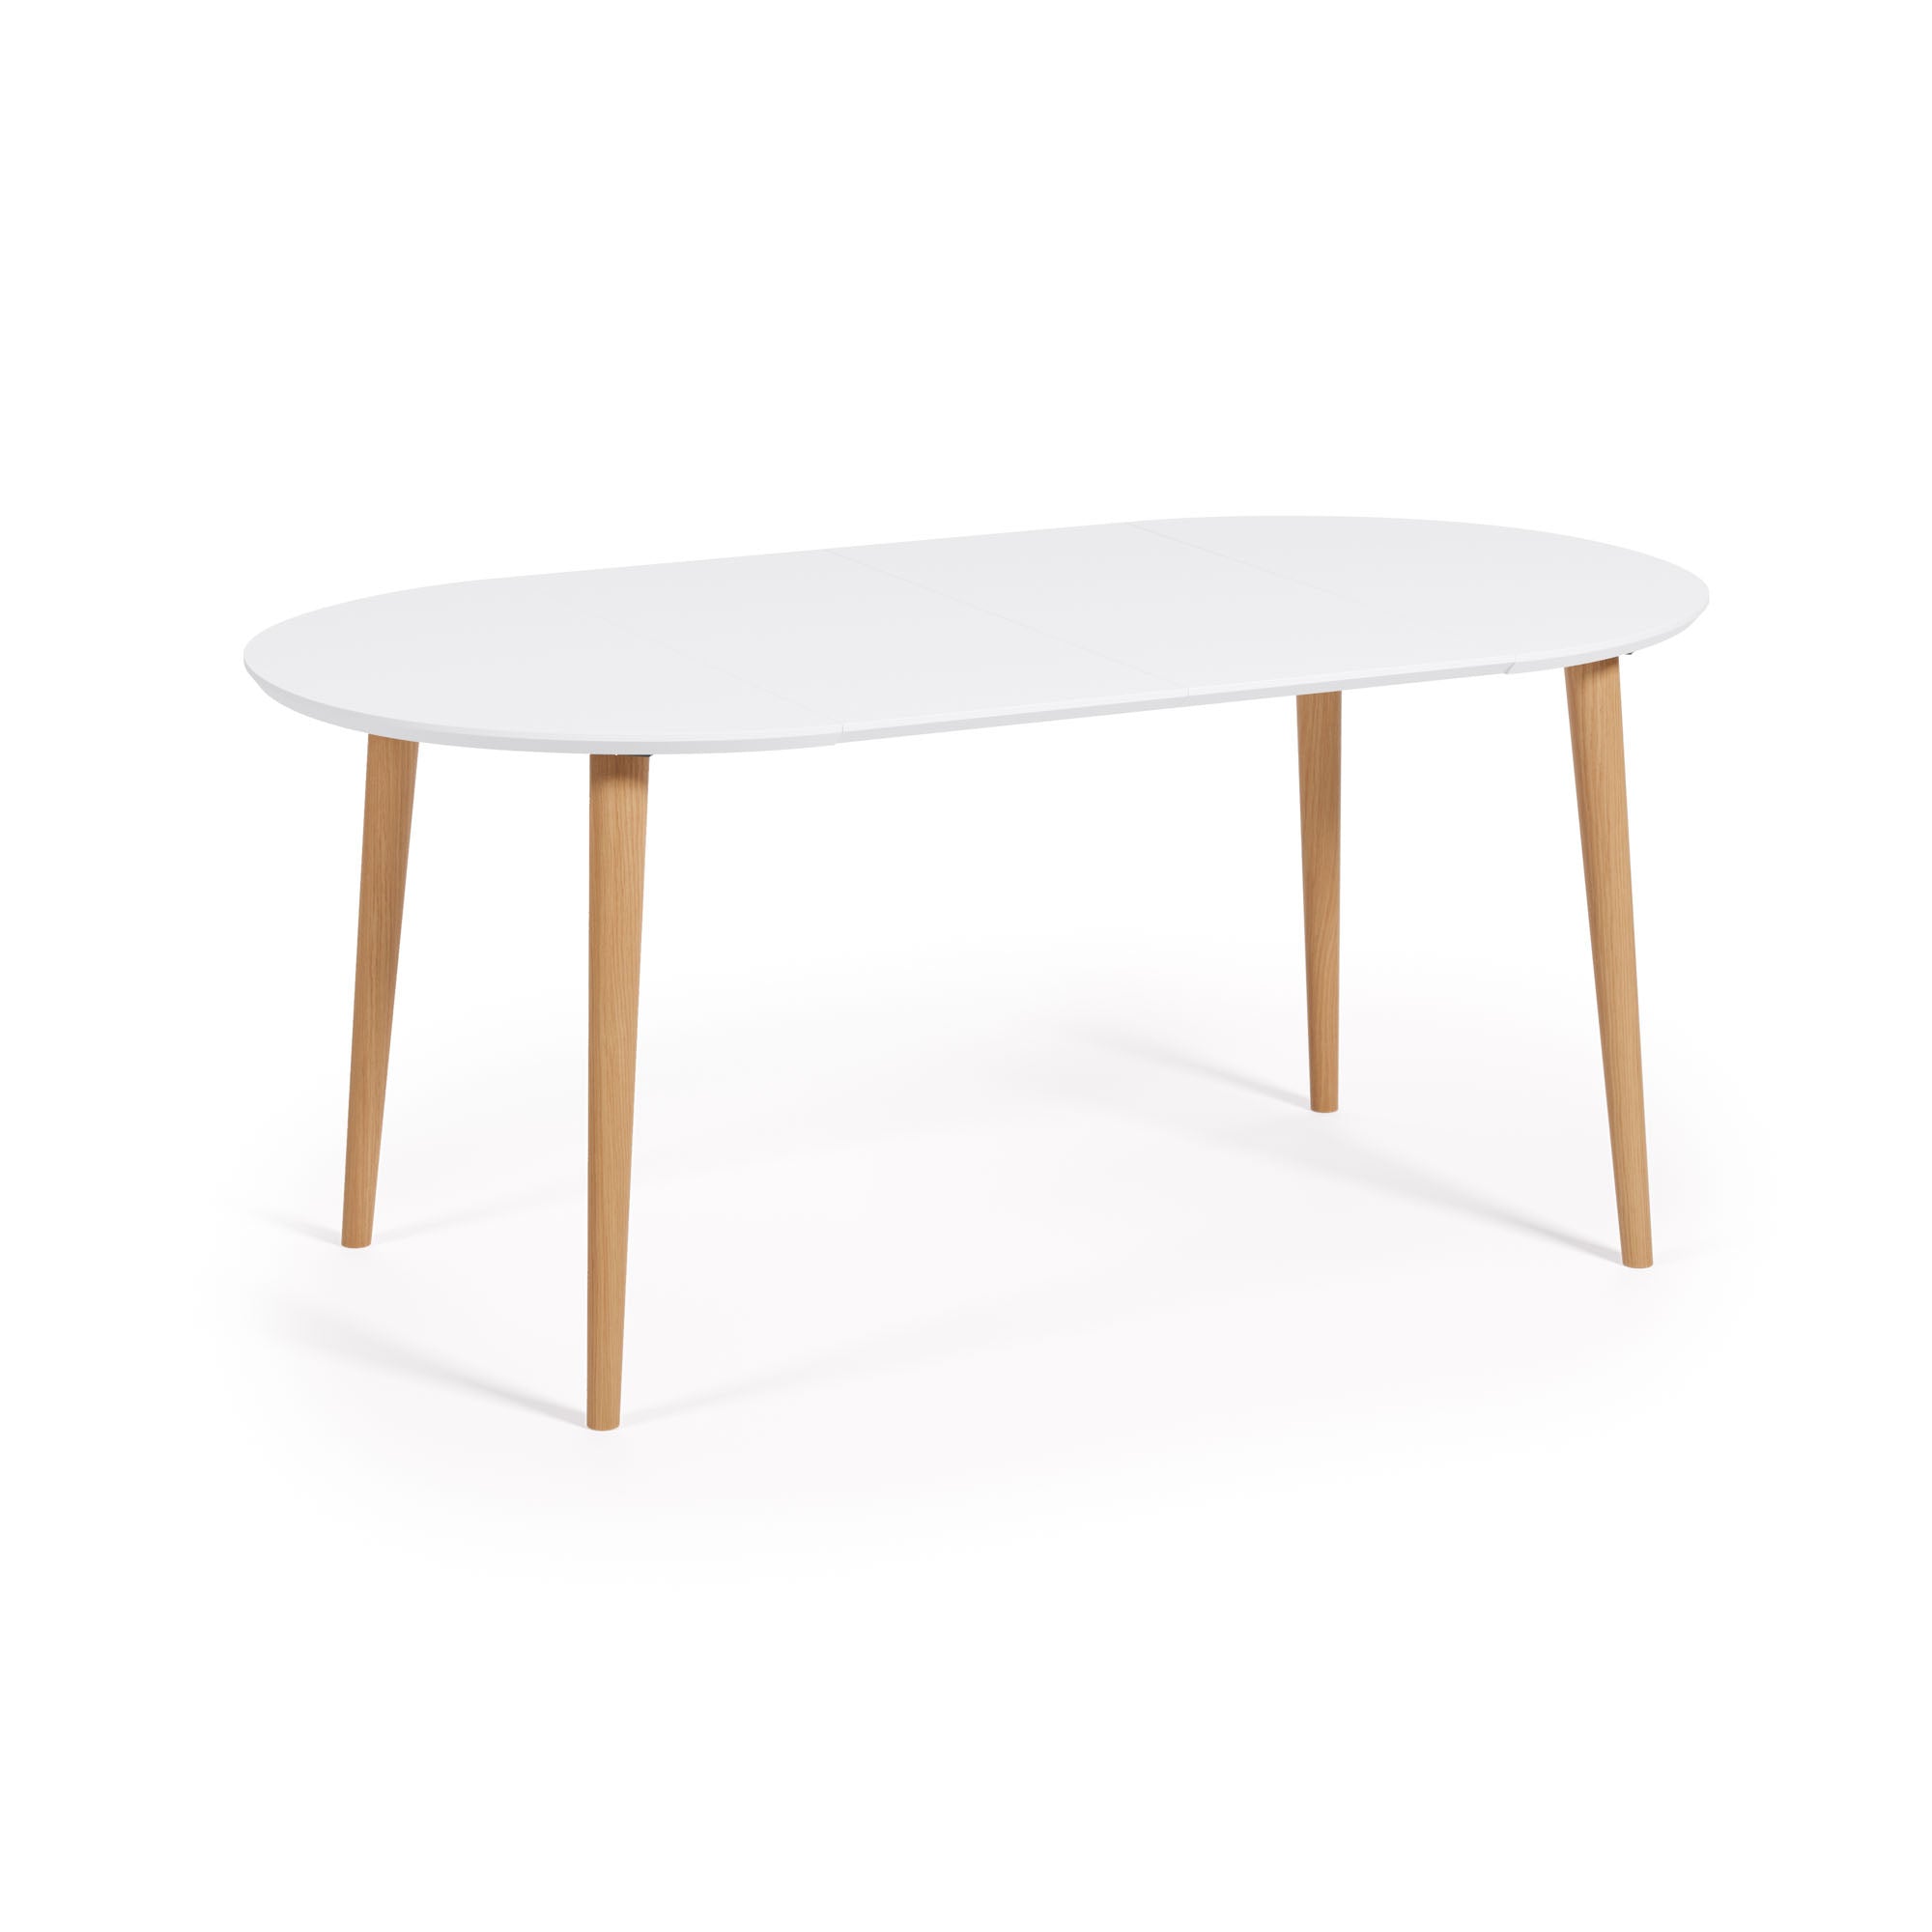 Oqui extendable round table in MDF with white lacquer and solid beech wood legs, 90 (170) x 90 cm